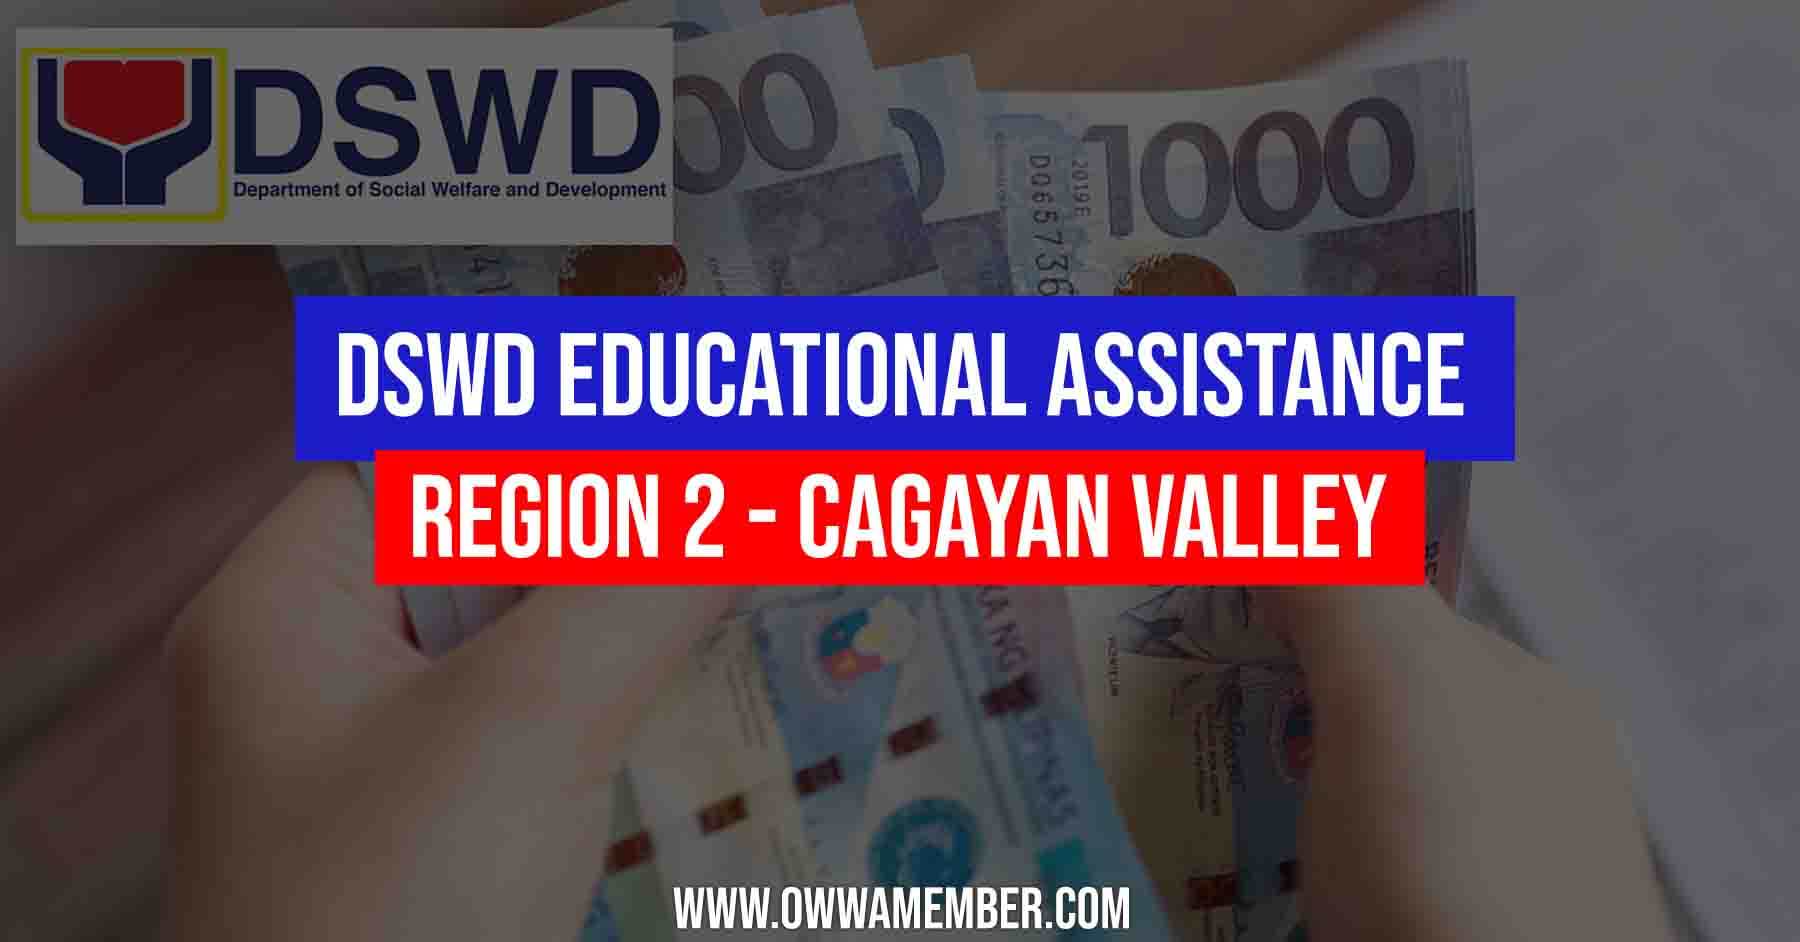 dswd region 2 cagayan valley educational assistance